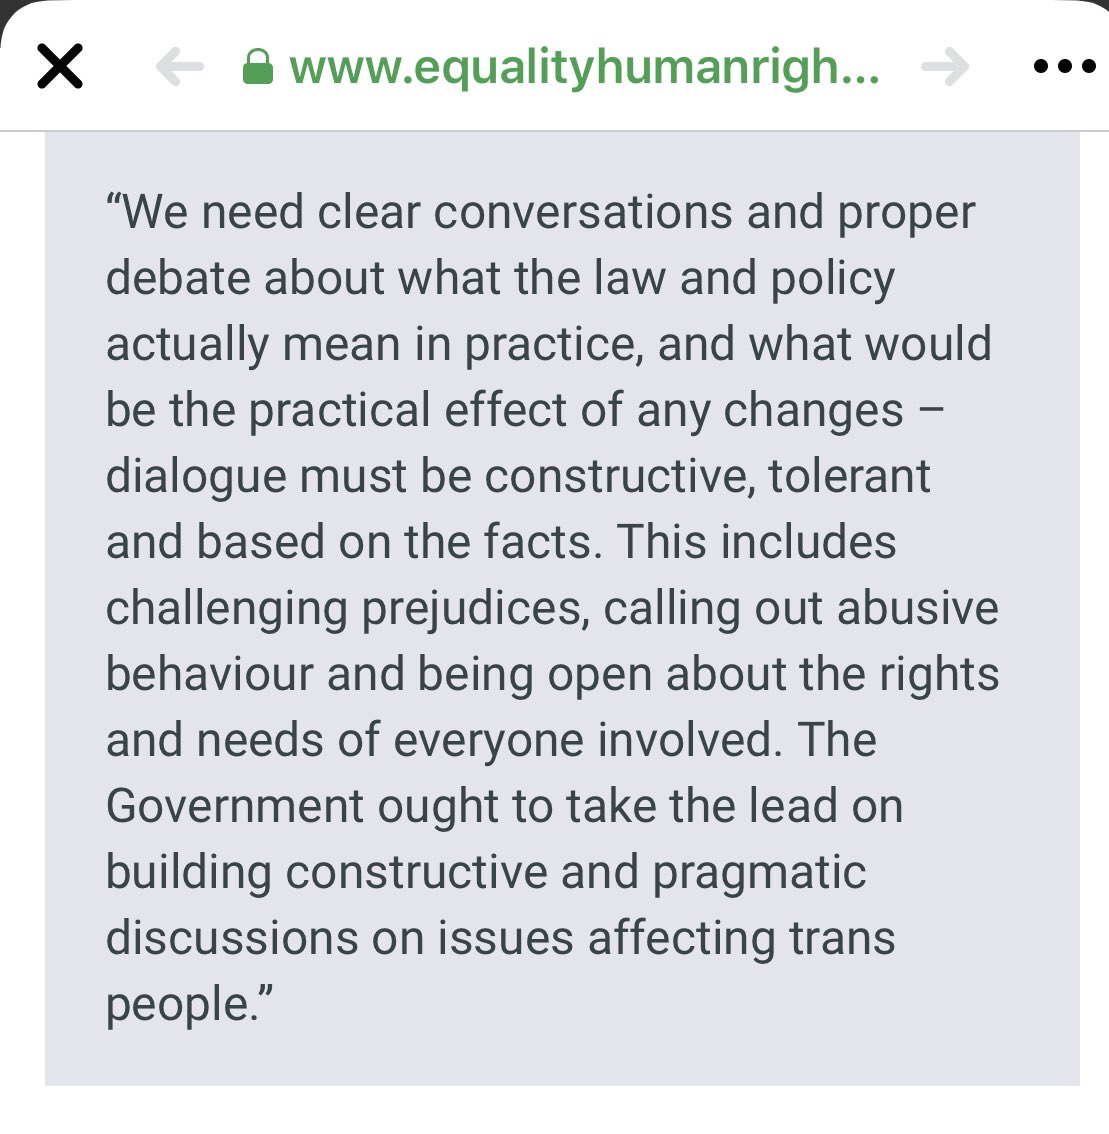 We have long called for constructive, evidence-based discussions to find practical and fair solutions to the conflict of rights. We are glad to see EHRC now call for this too. /9